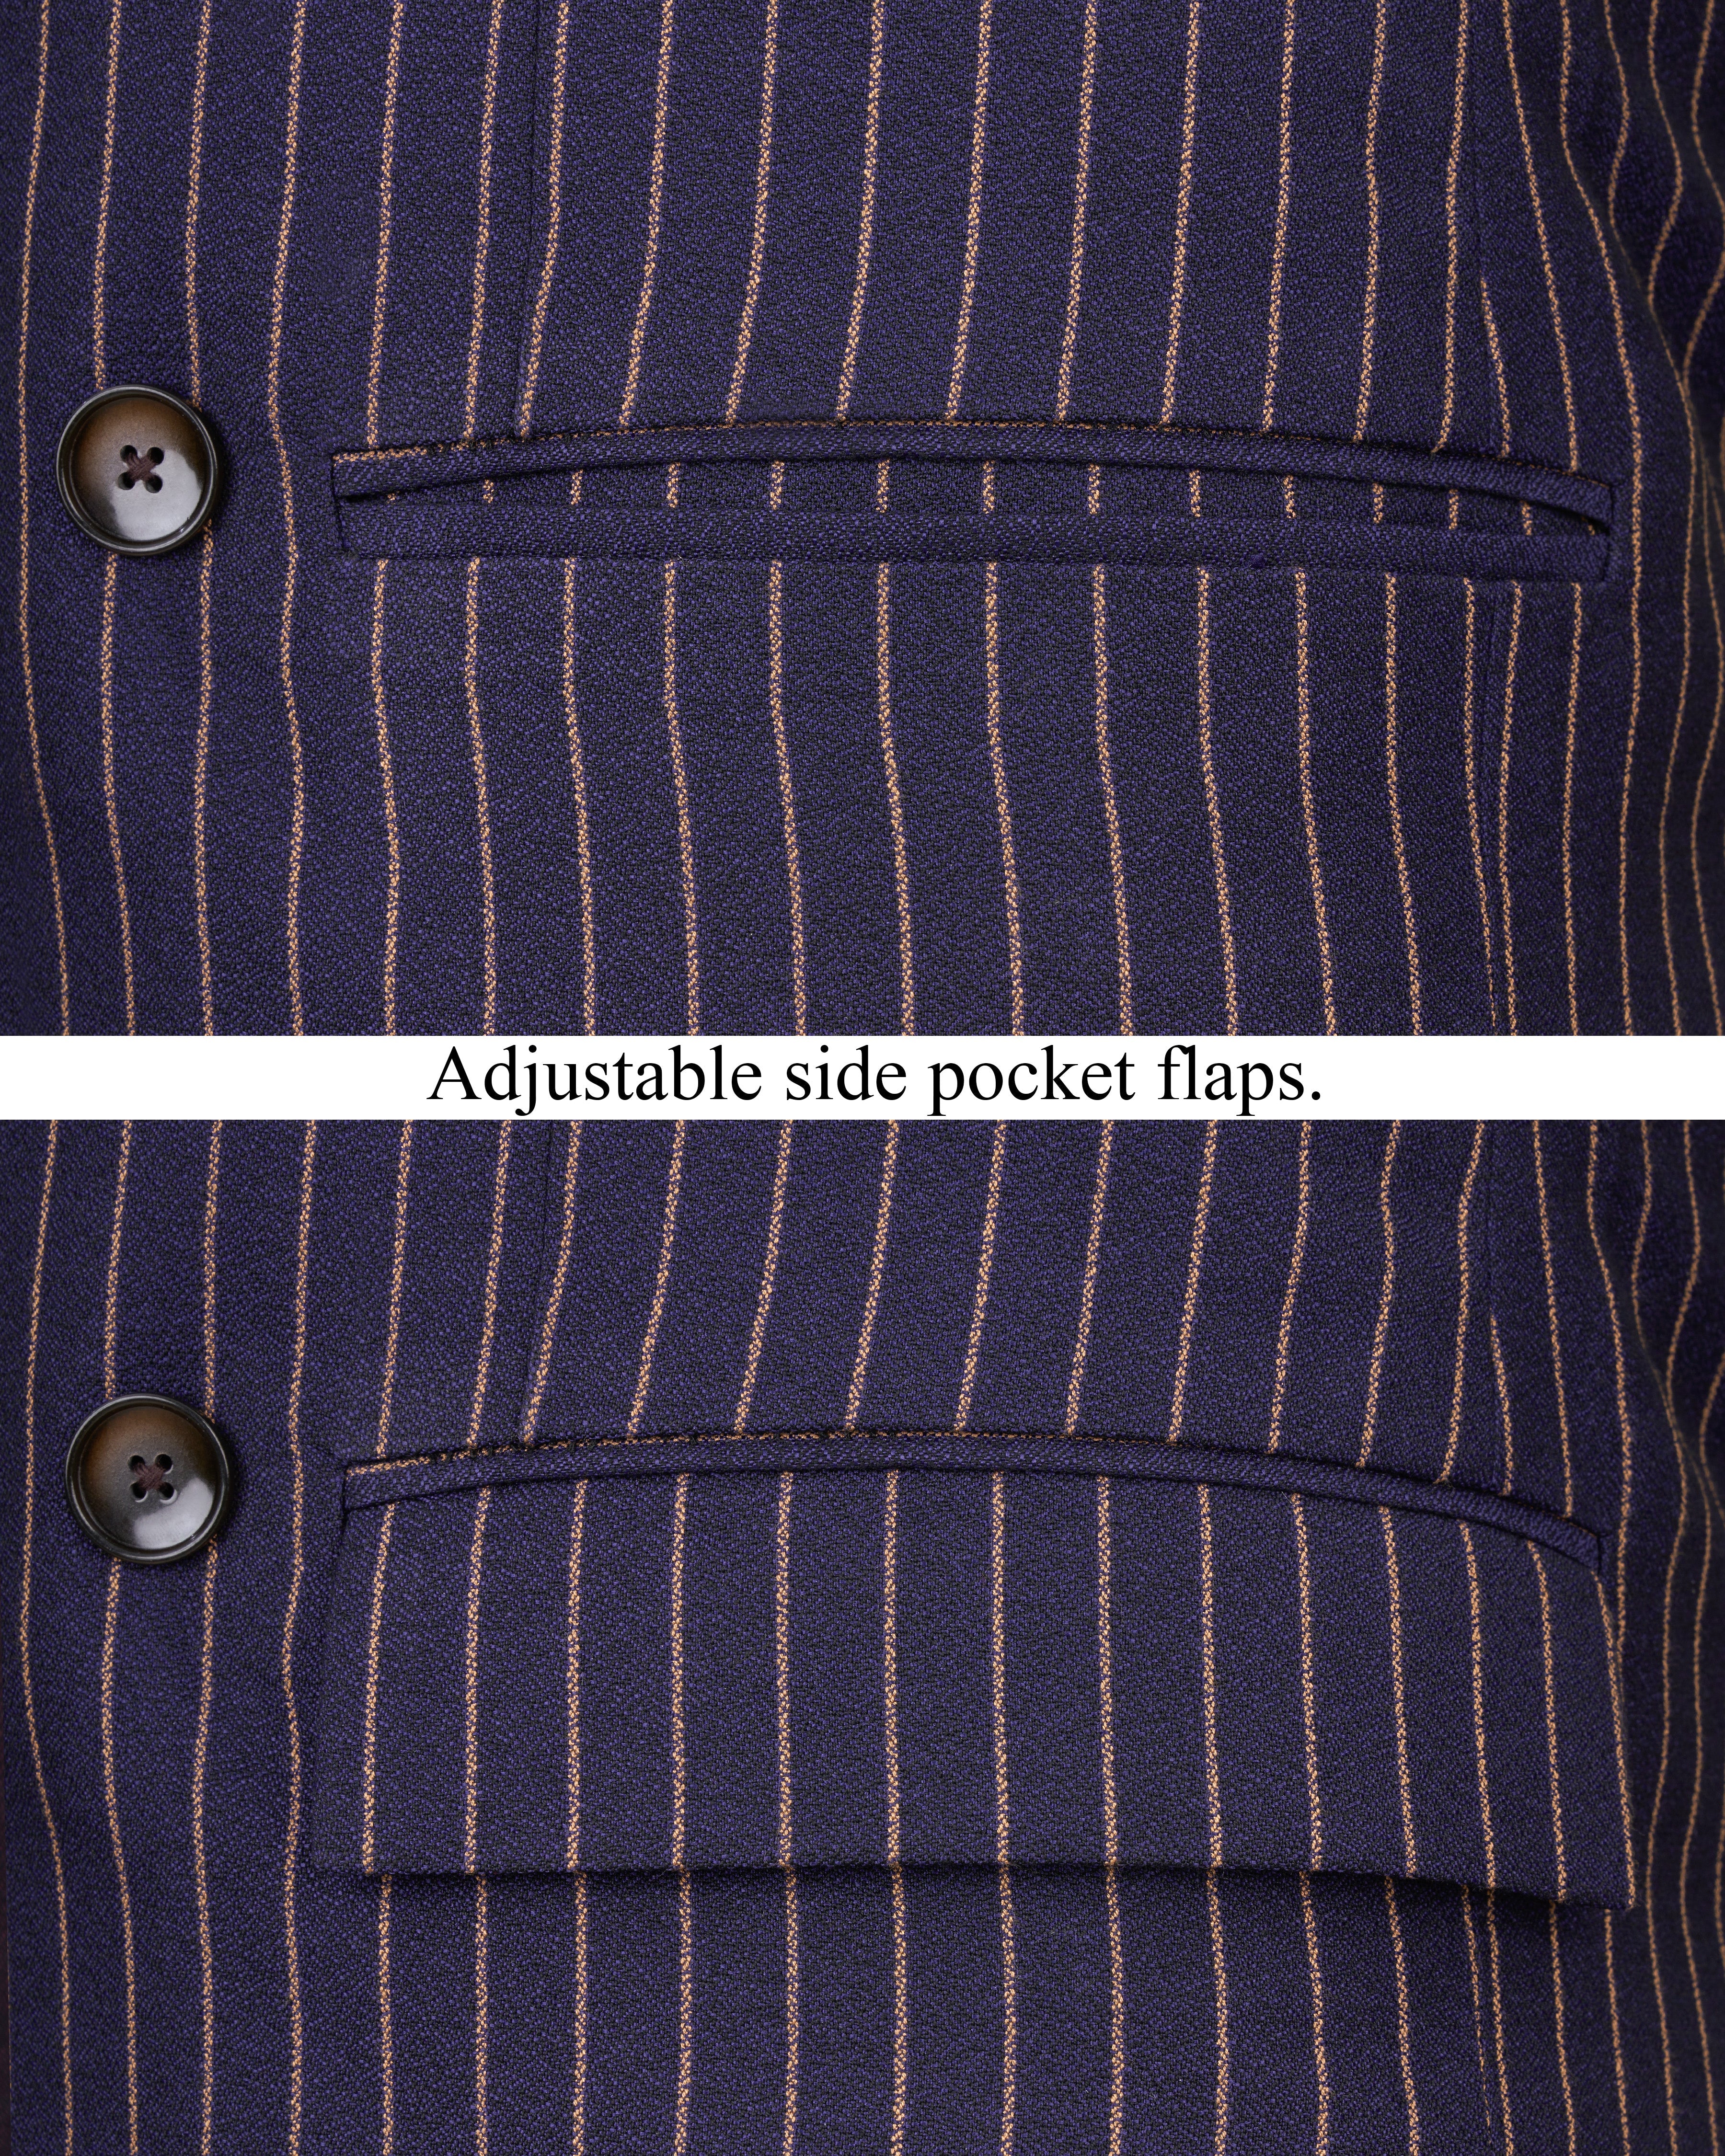 Tuna Navy Blue with Coral Reef Brown Striped Double-Breasted Blazer BL2480-DB-36, BL2480-DB-38, BL2480-DB-40, BL2480-DB-42, BL2480-DB-44, BL2480-DB-46, BL2480-DB-48, BL2480-DB-50, BL2480-DB-52, BL2480-DB-54, BL2480-DB-56, BL2480-DB-58, BL2480-DB-60